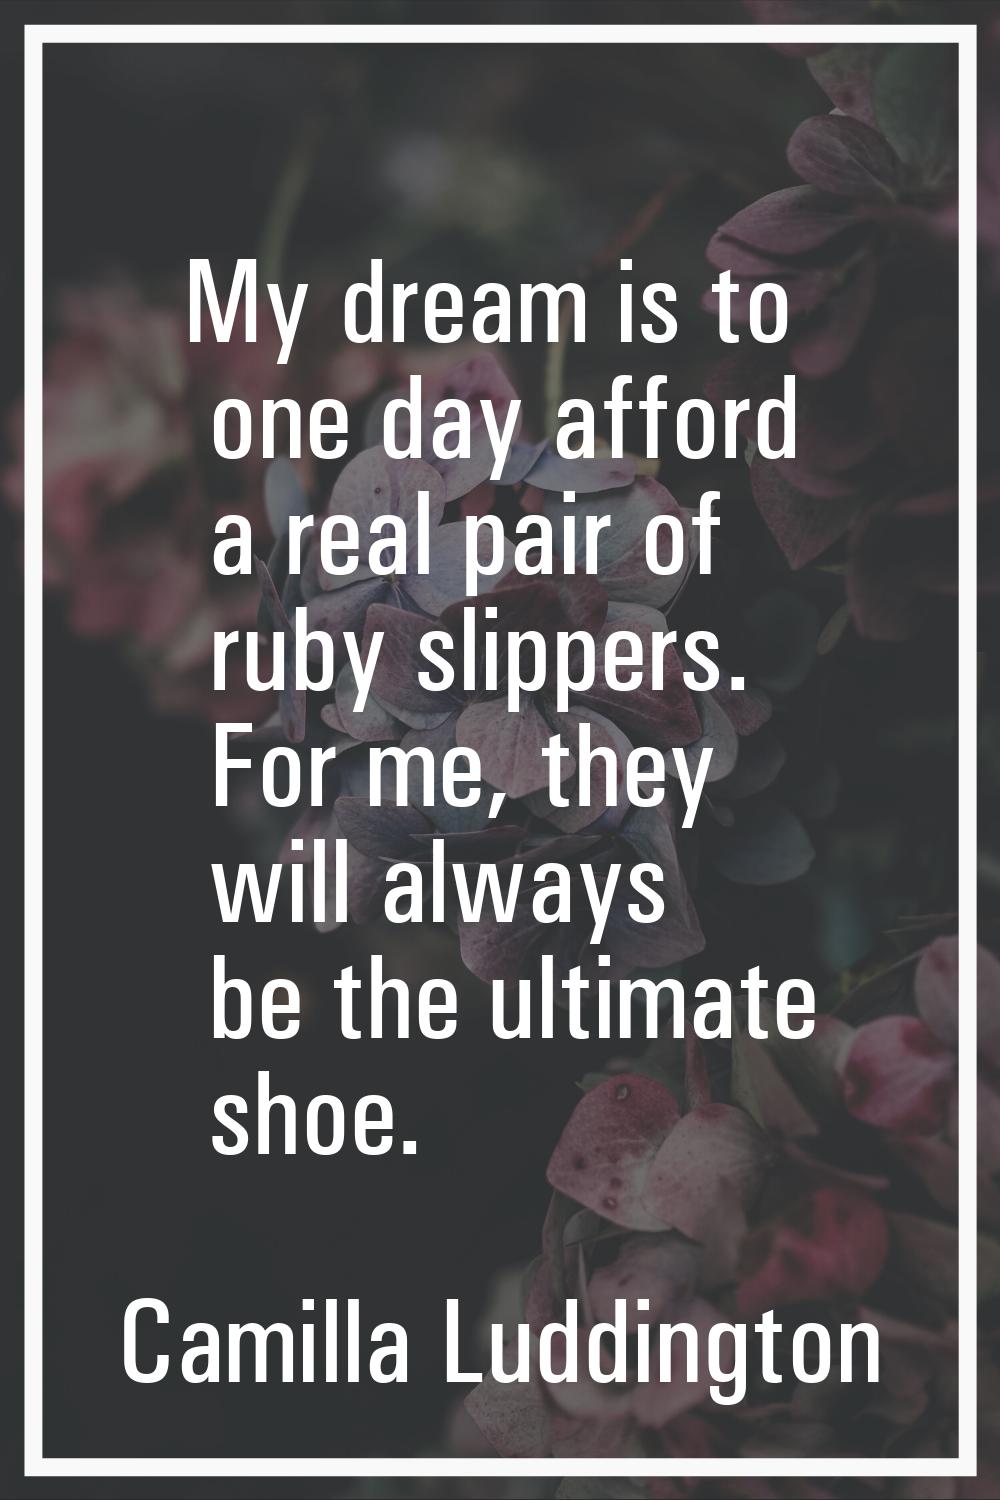 My dream is to one day afford a real pair of ruby slippers. For me, they will always be the ultimat